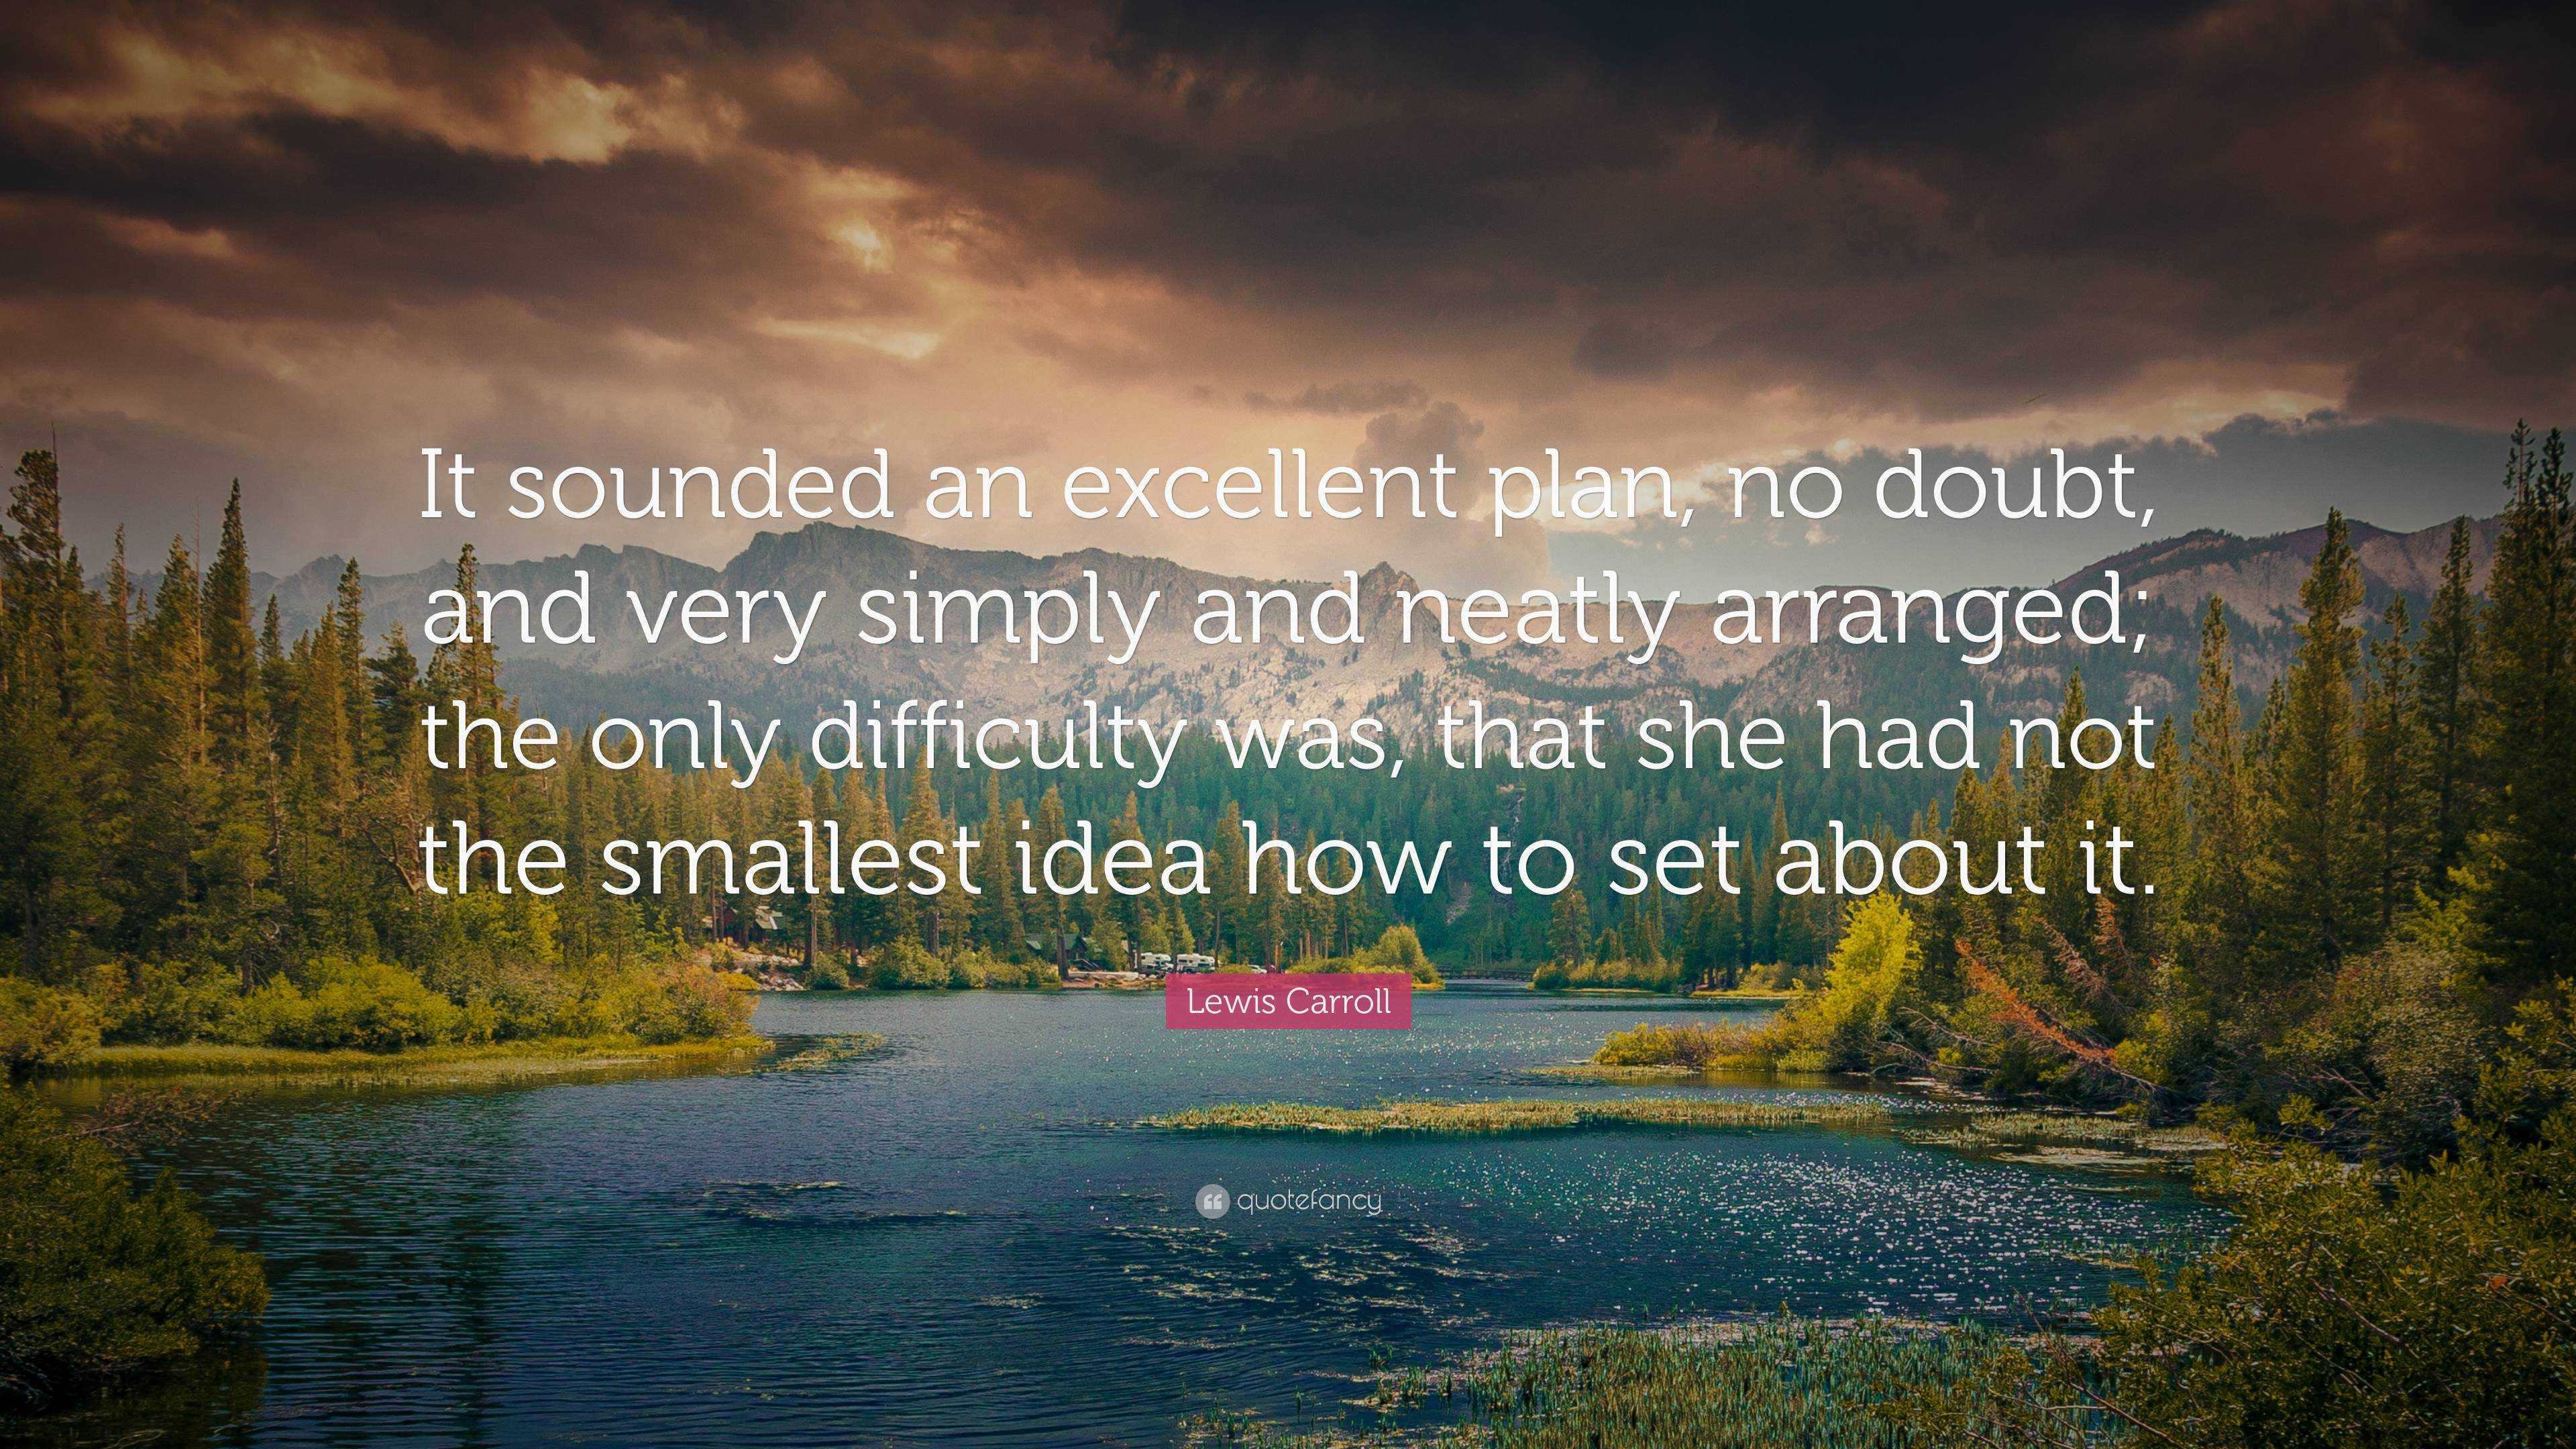 Lewis Carroll Quote: “It sounded an excellent plan, no doubt, and very ...